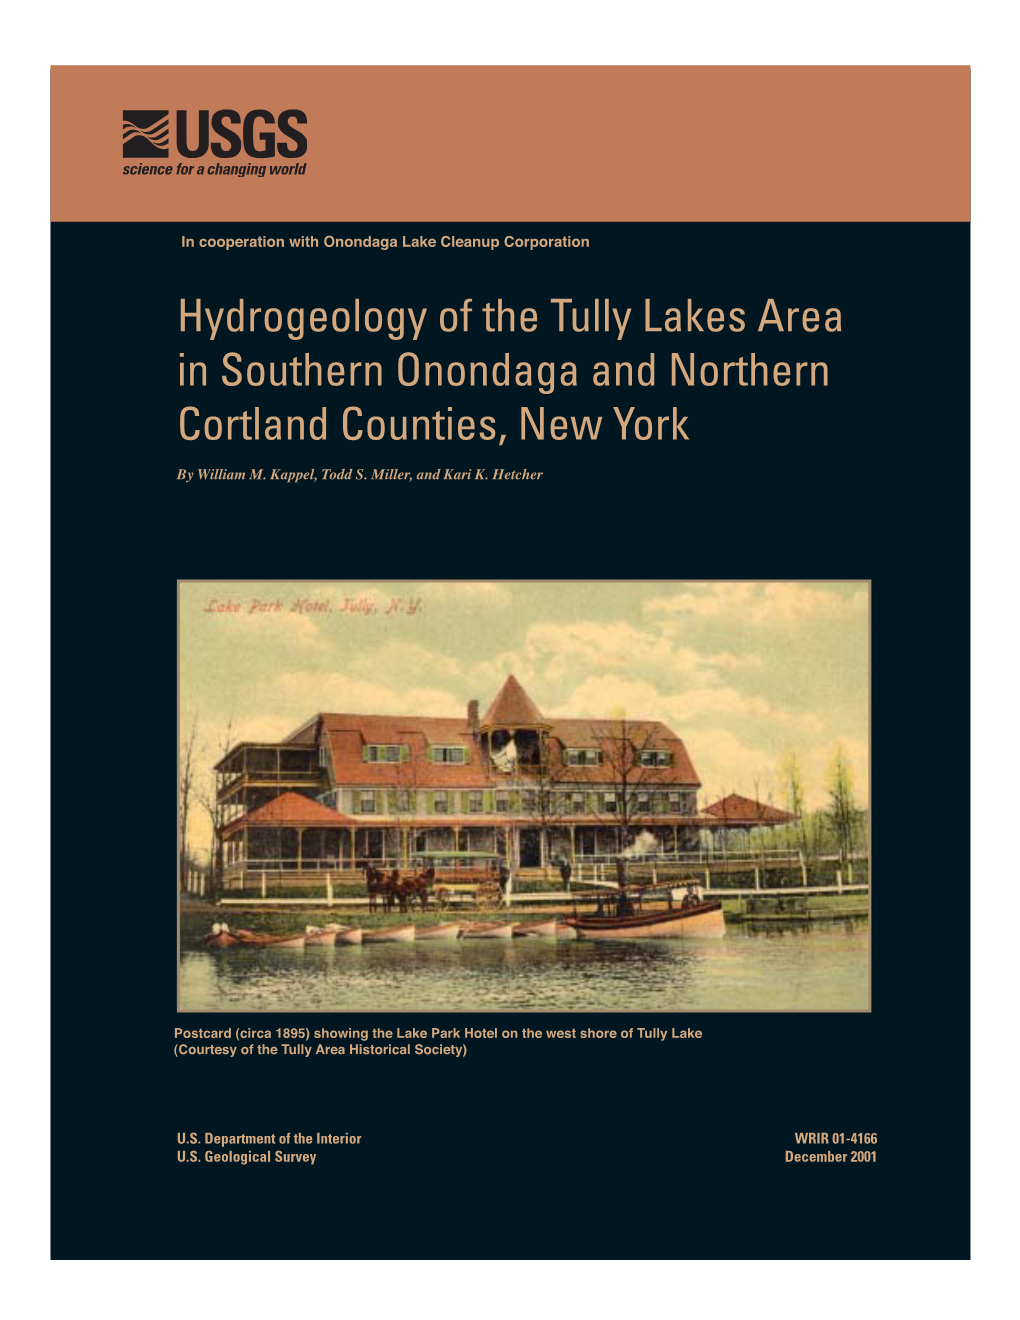 Hydrogeology of the Tully Lakes Area in Southern Onondaga and Northern Cortland Counties, New York